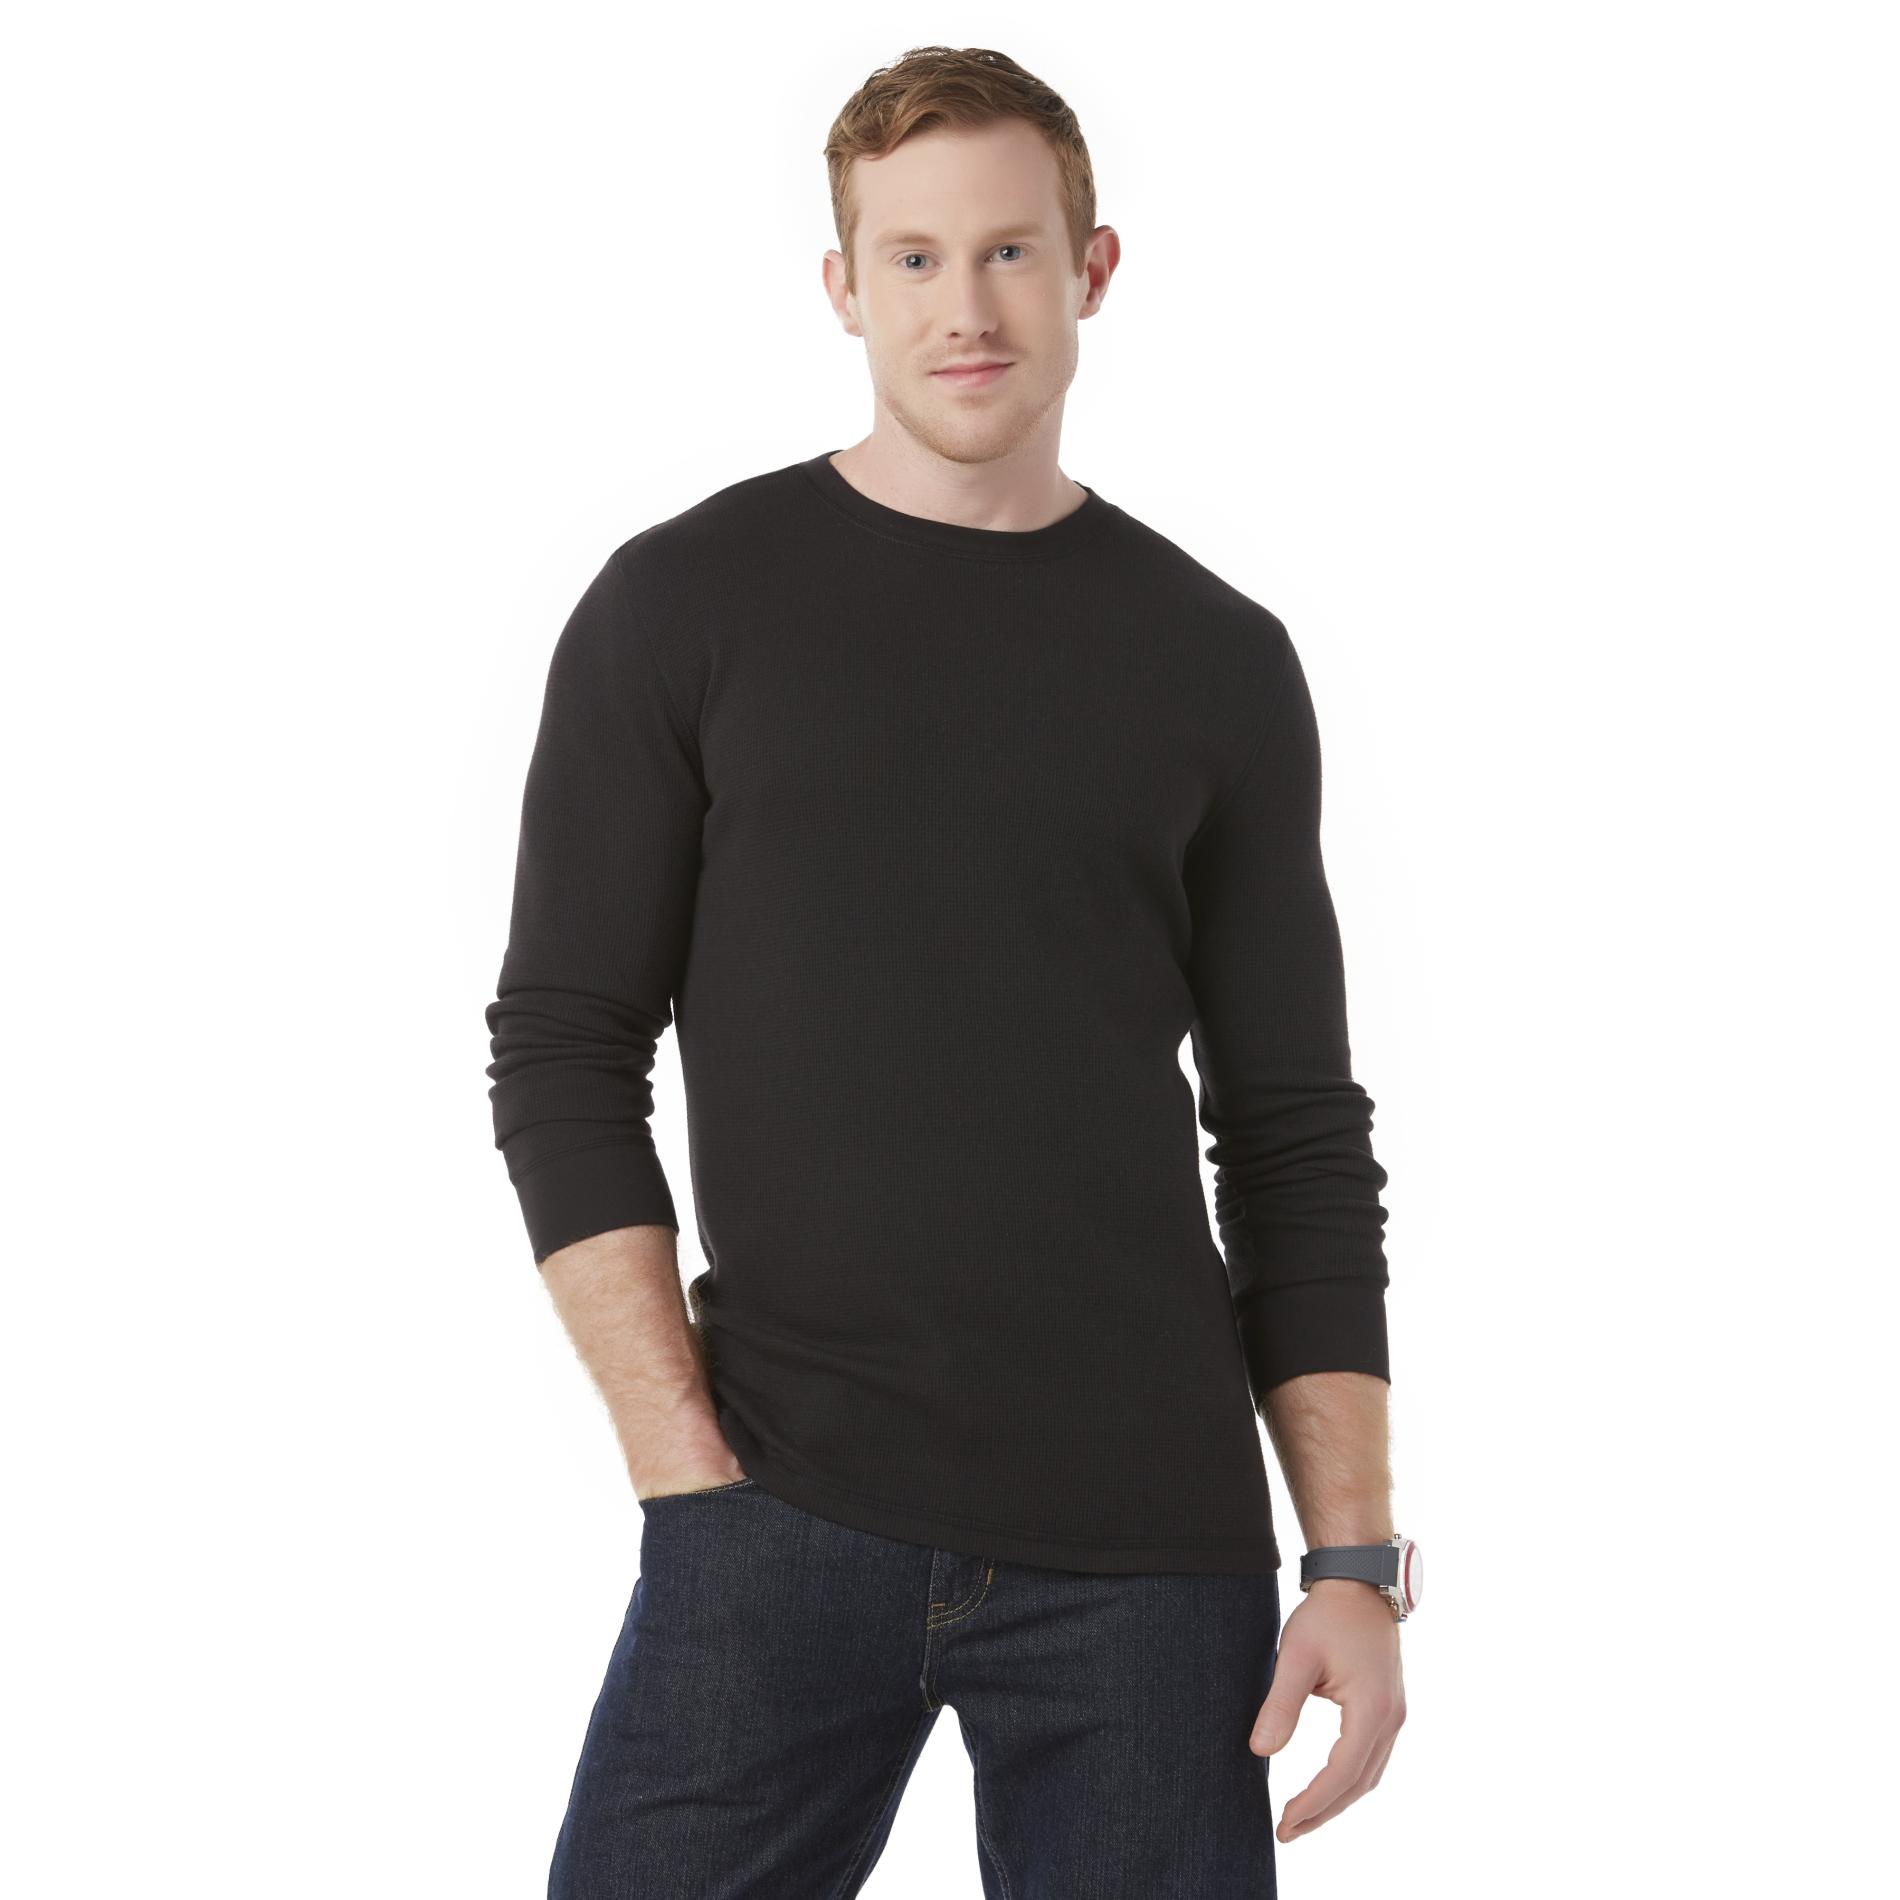 Structure Men's Thermal Shirt